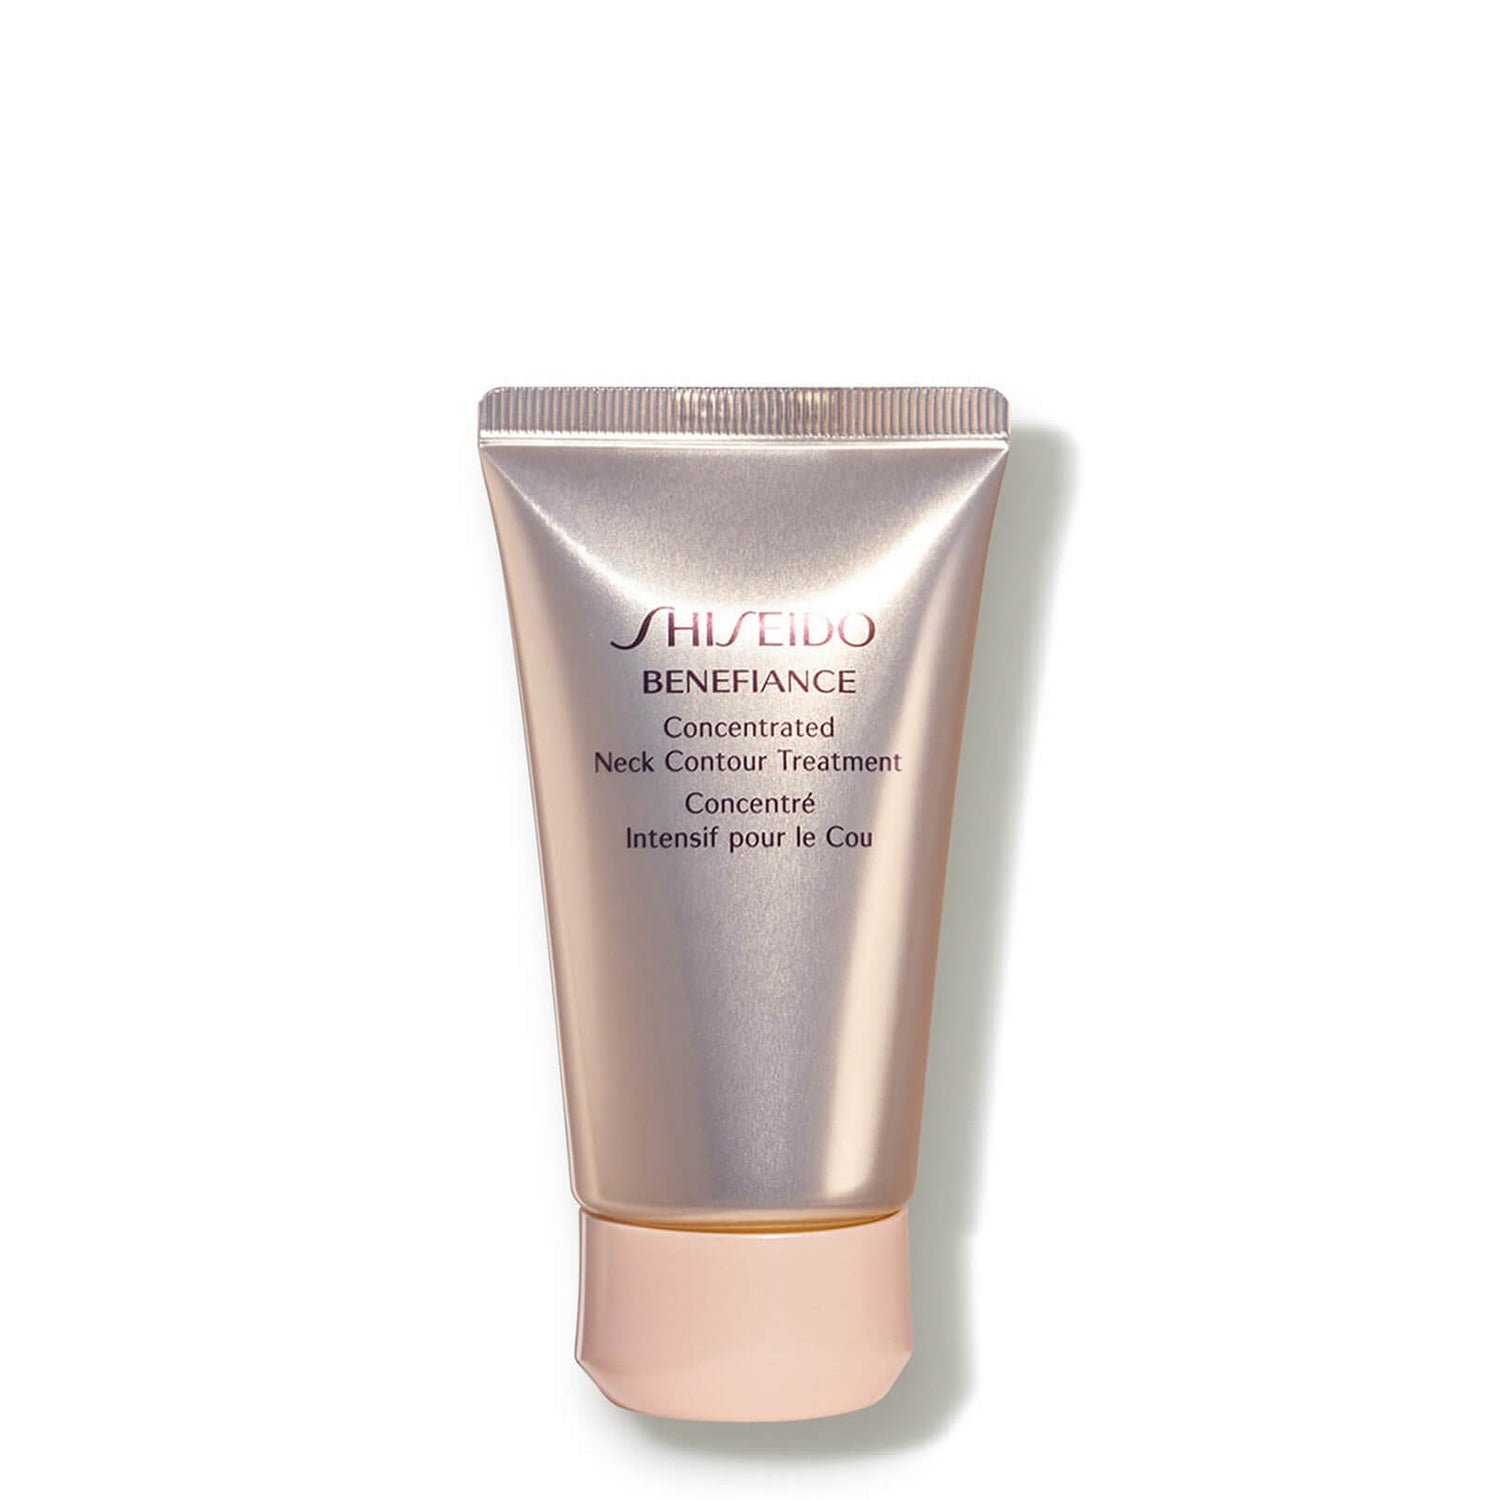 Shiseido Benefiance Concentrated Neck Contour Treatment (50ml)